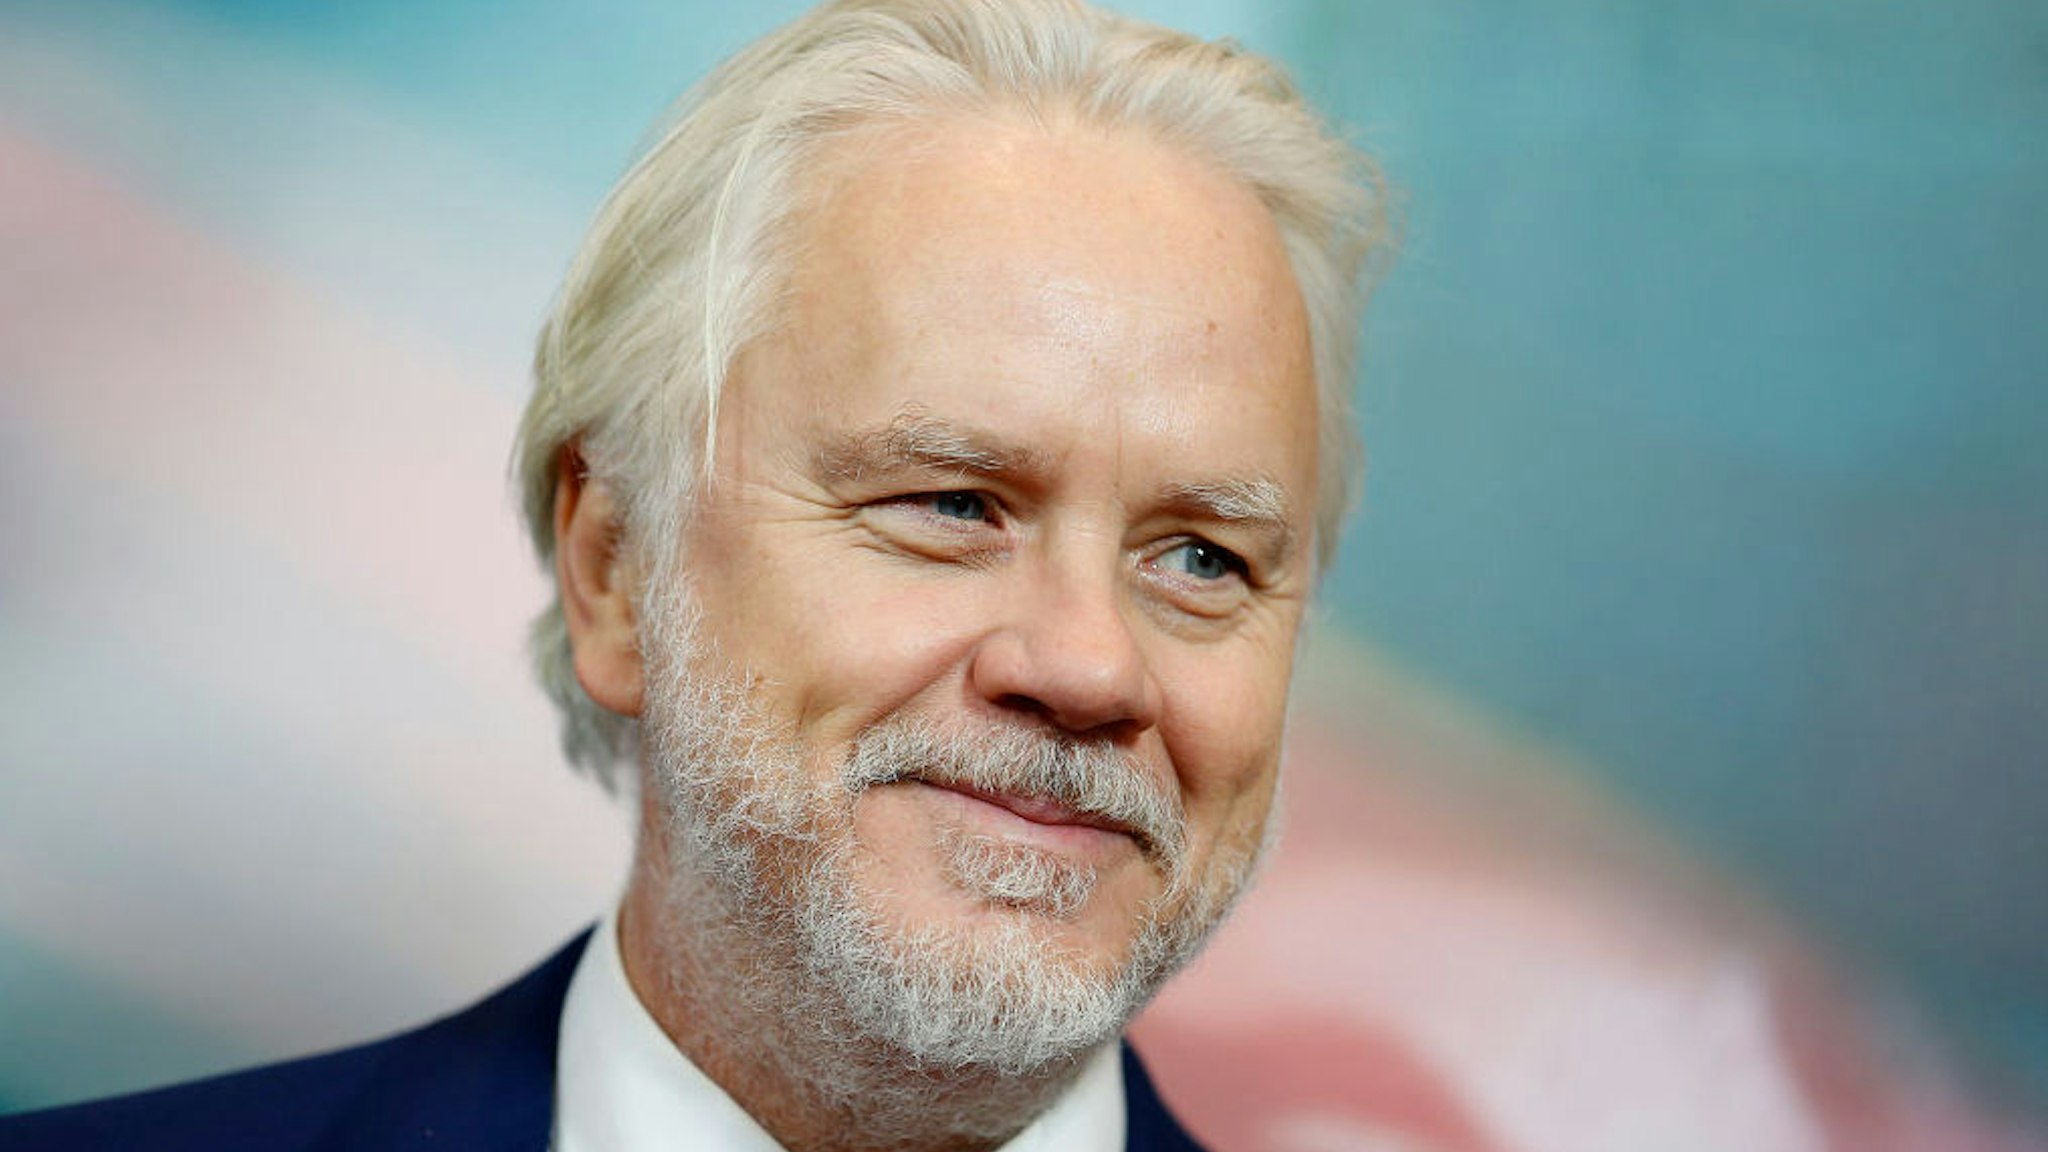 Tim Robbins attends "Dark Waters" New York Premiere at Walter Reade Theater on November 12, 2019 in New York City.